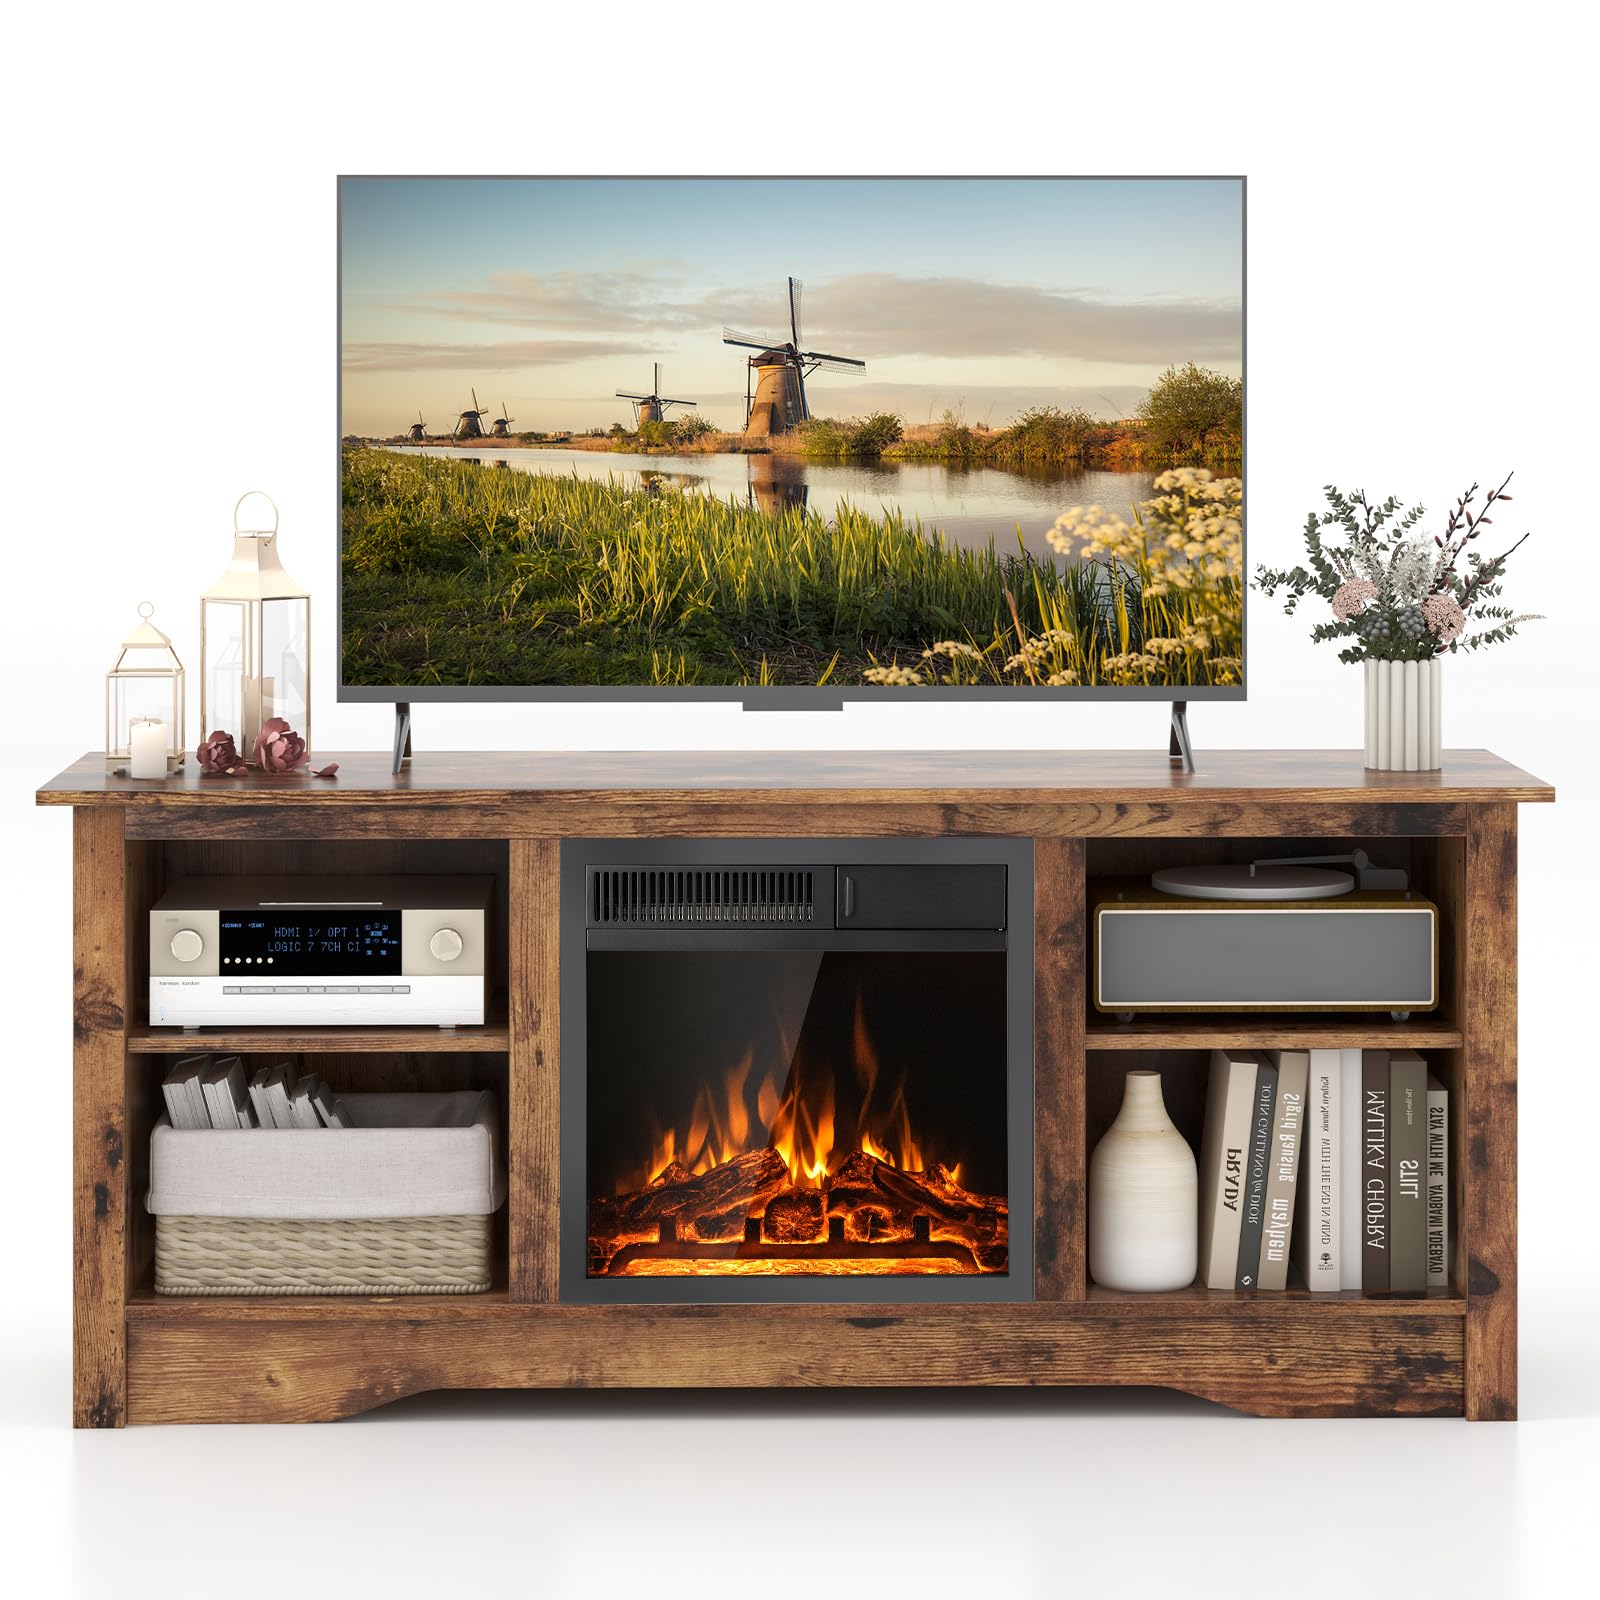 Giantex Fireplace TV Stand for TVs Up to 65”, Entertainment Center with Adjustable Shelves